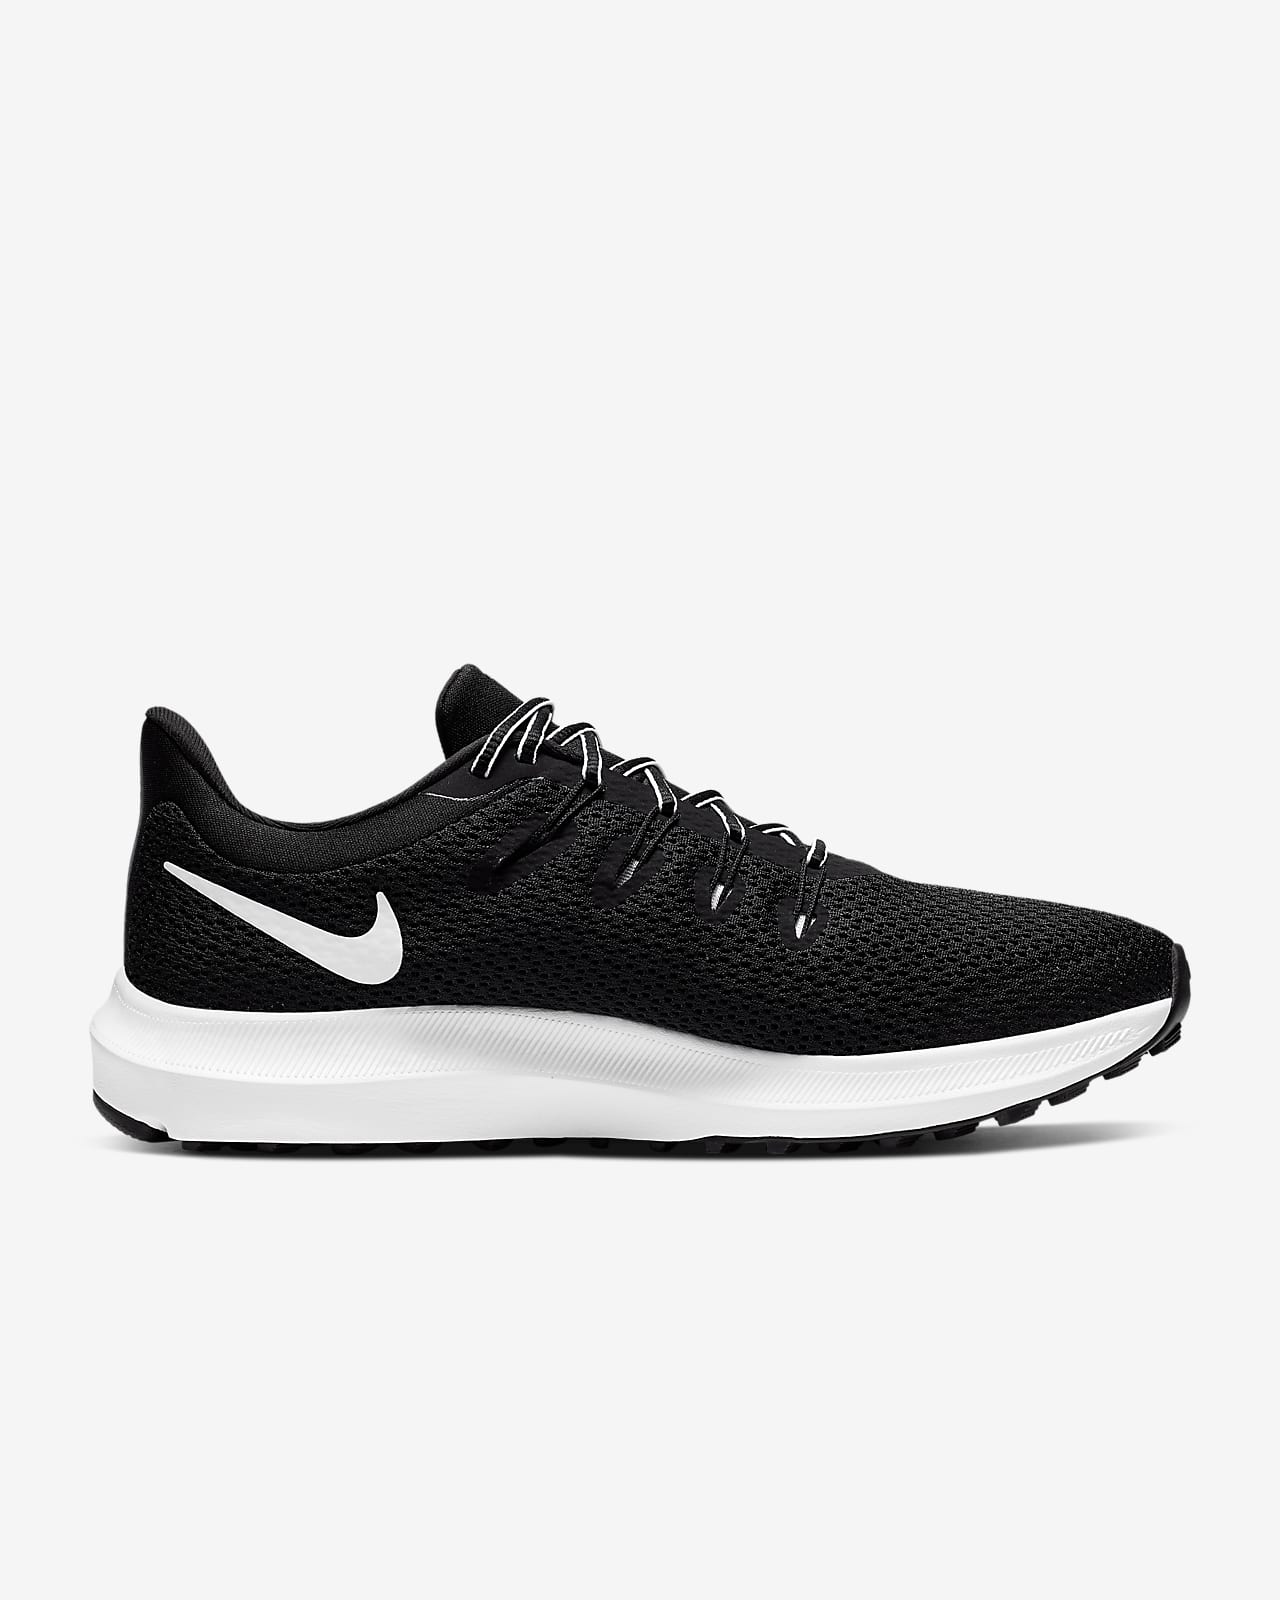 nike quest women's running shoes review